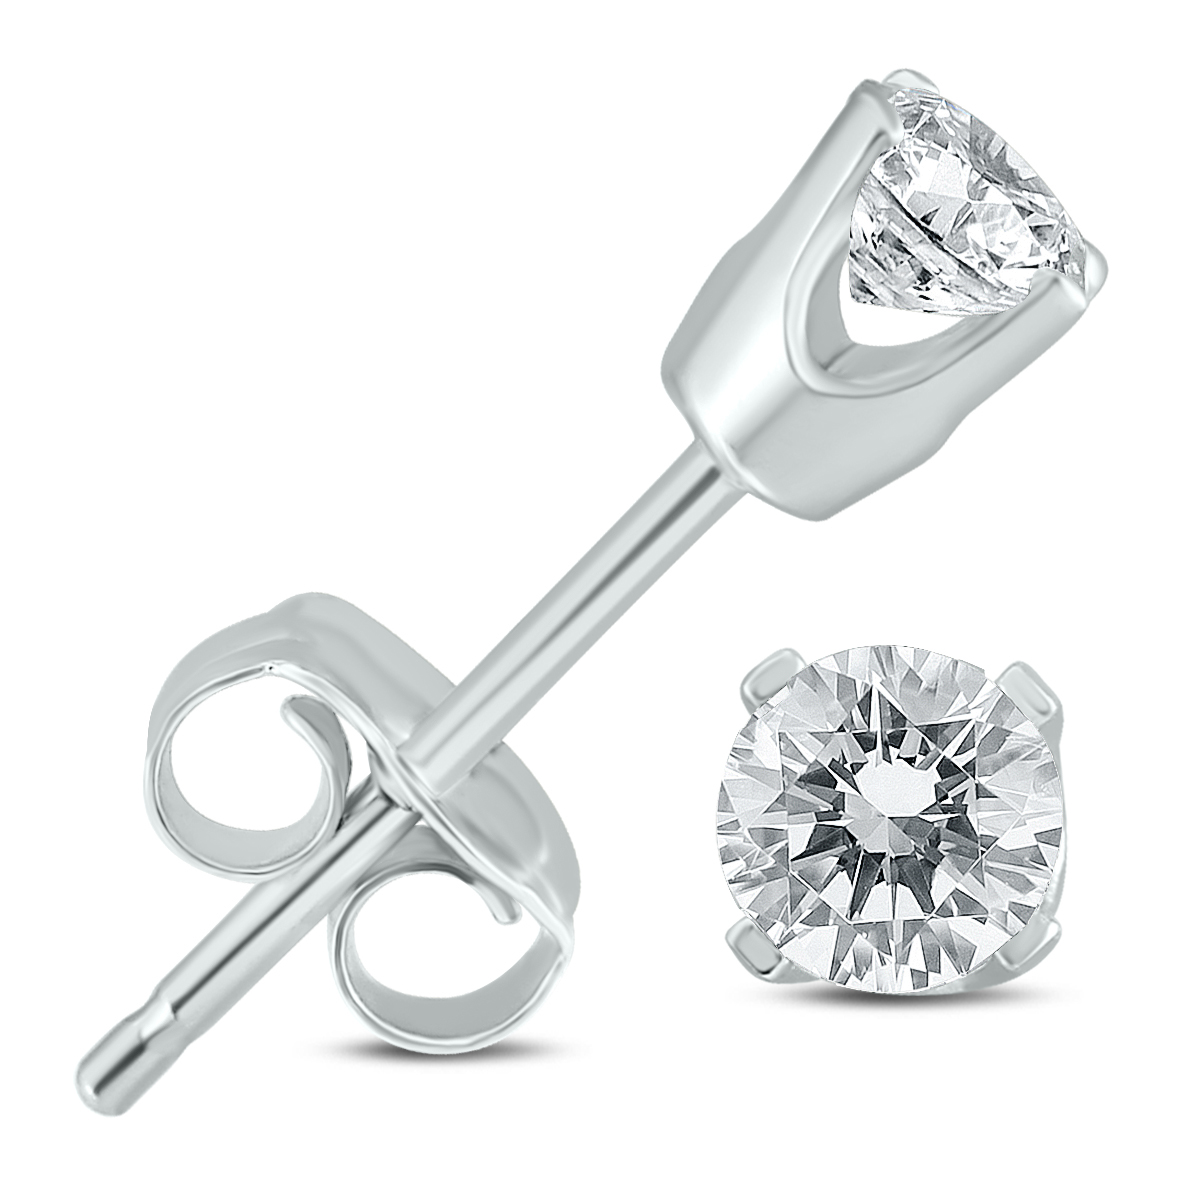 Image of 1/3 Carat TW Diamond Solitaire Stud Earrings in 14K White Gold (I-J COLOR SI2-SI3 CLARITY)